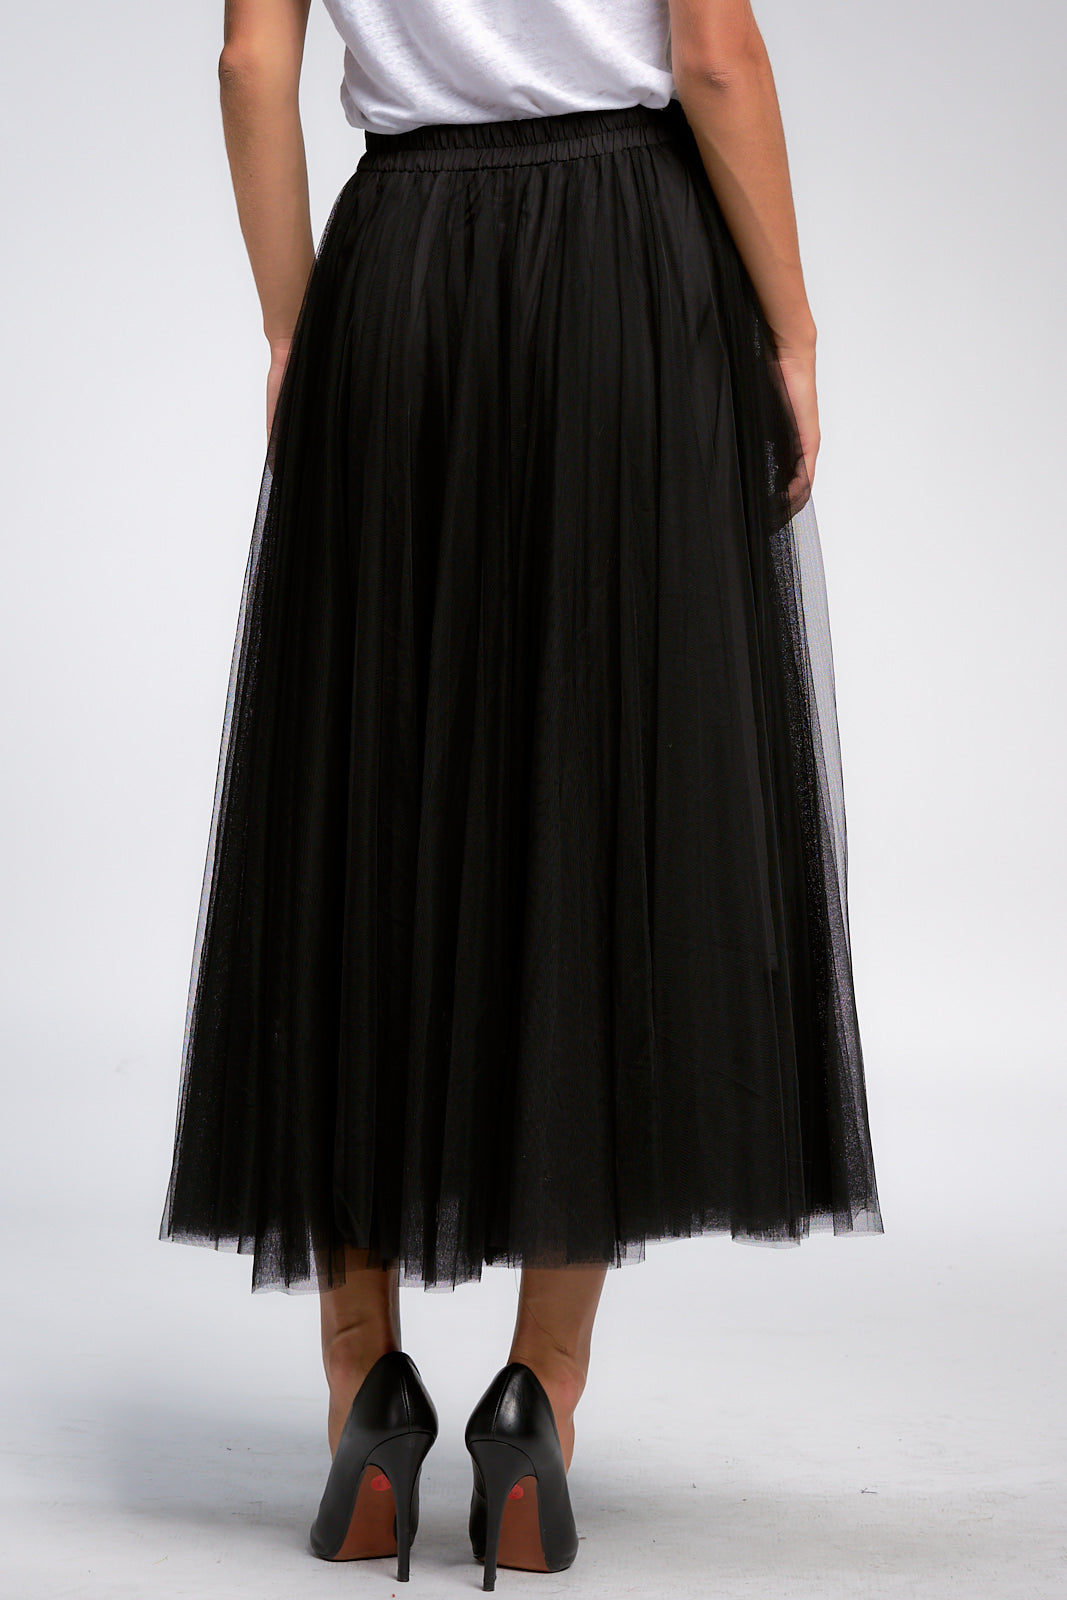 Black Tulle Skirt with Tie Waistband